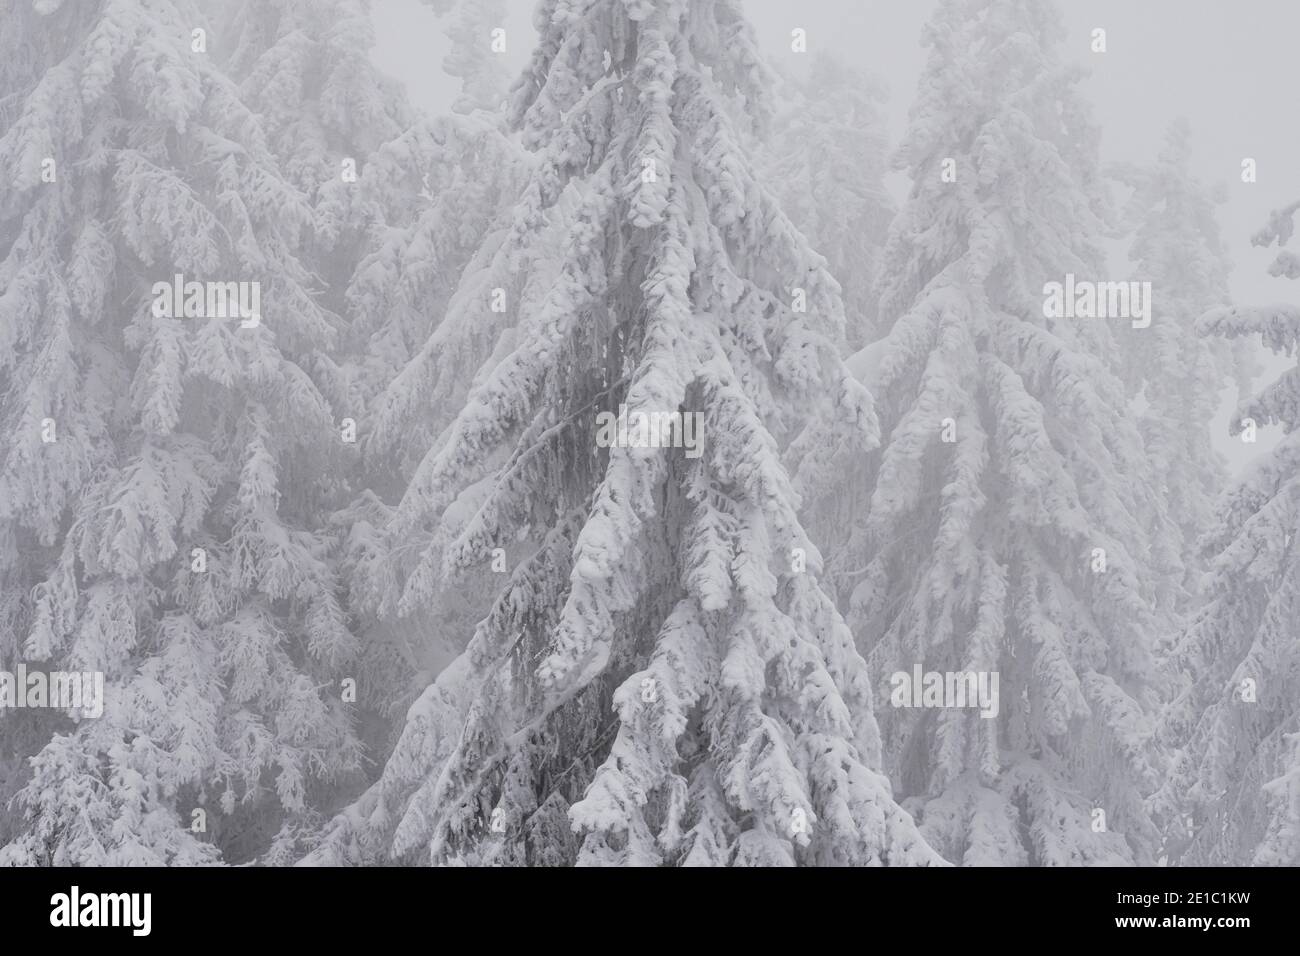 Snow covered coniferous trees (fir) in the forest on a frosty winter day. Stock Photo